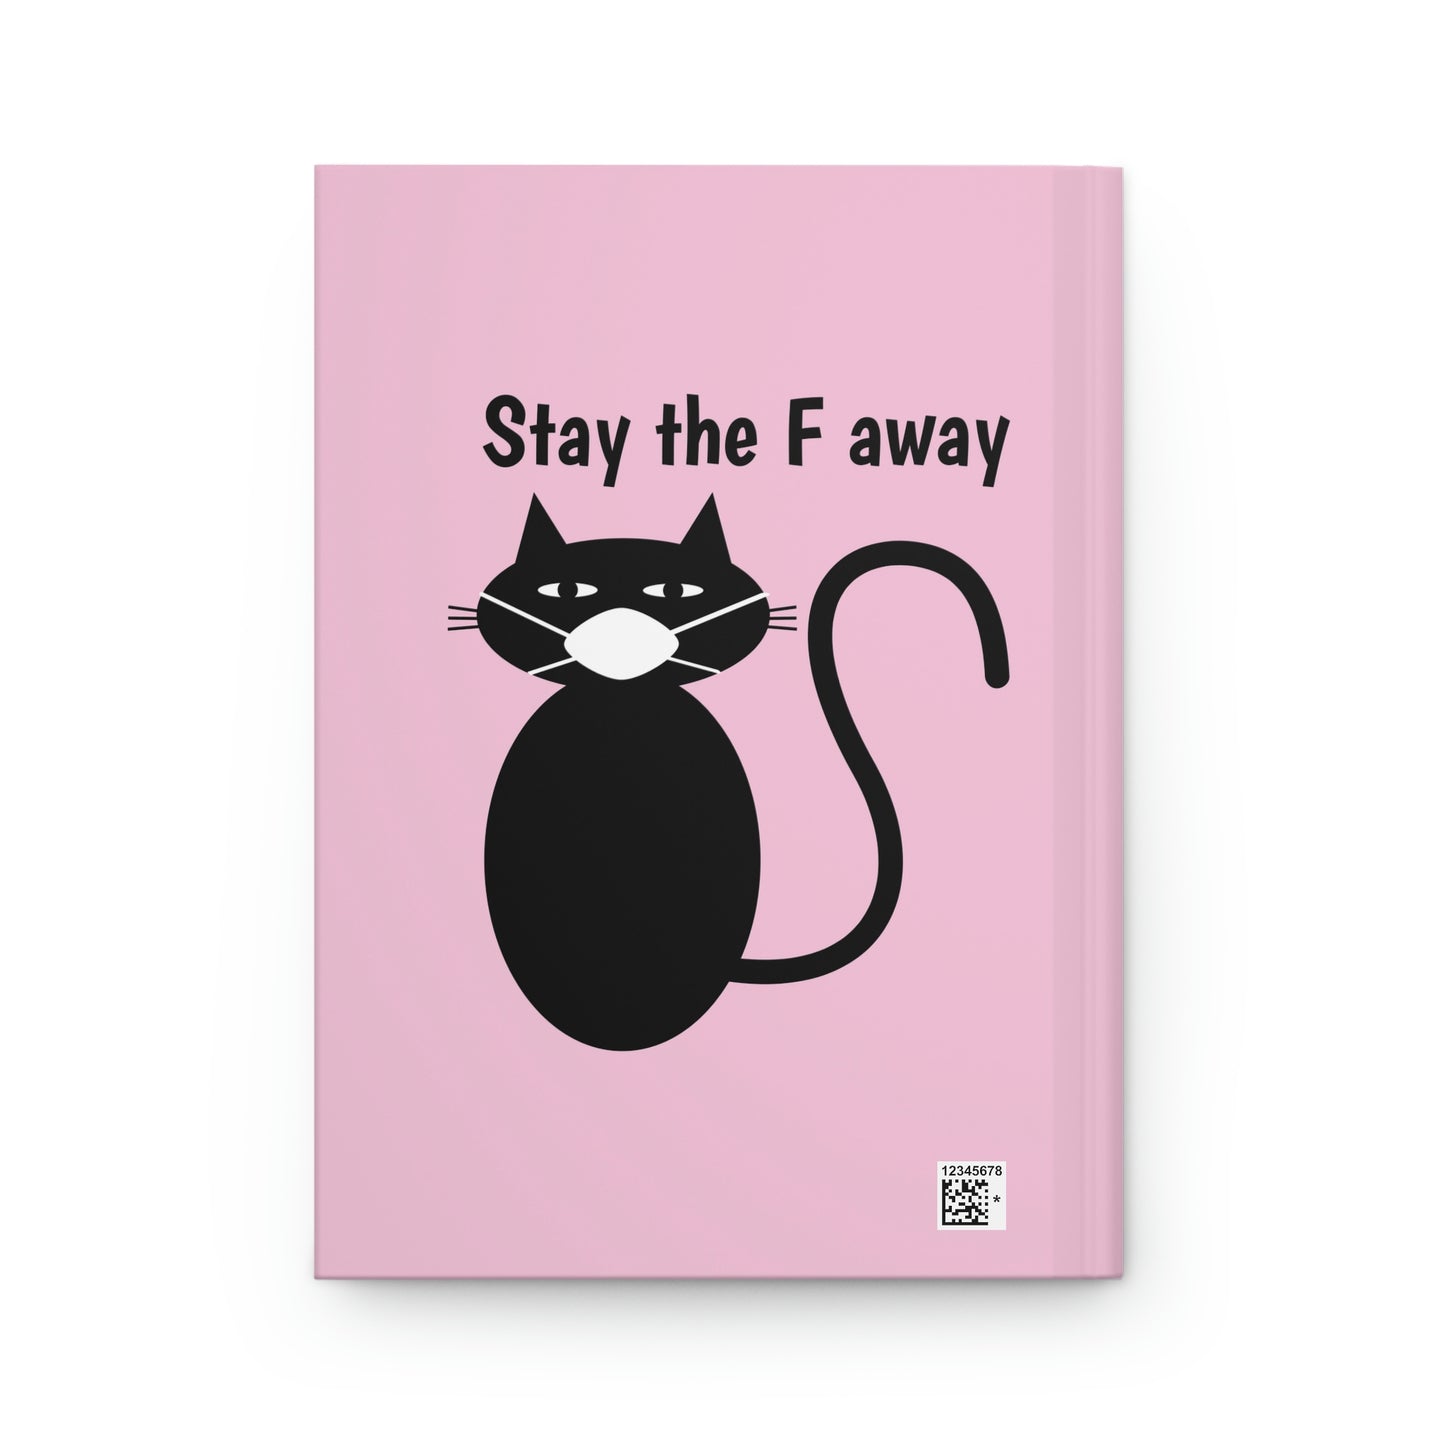 Black cat wearing mask says Stay the F away pink Hardcover Journal Matte